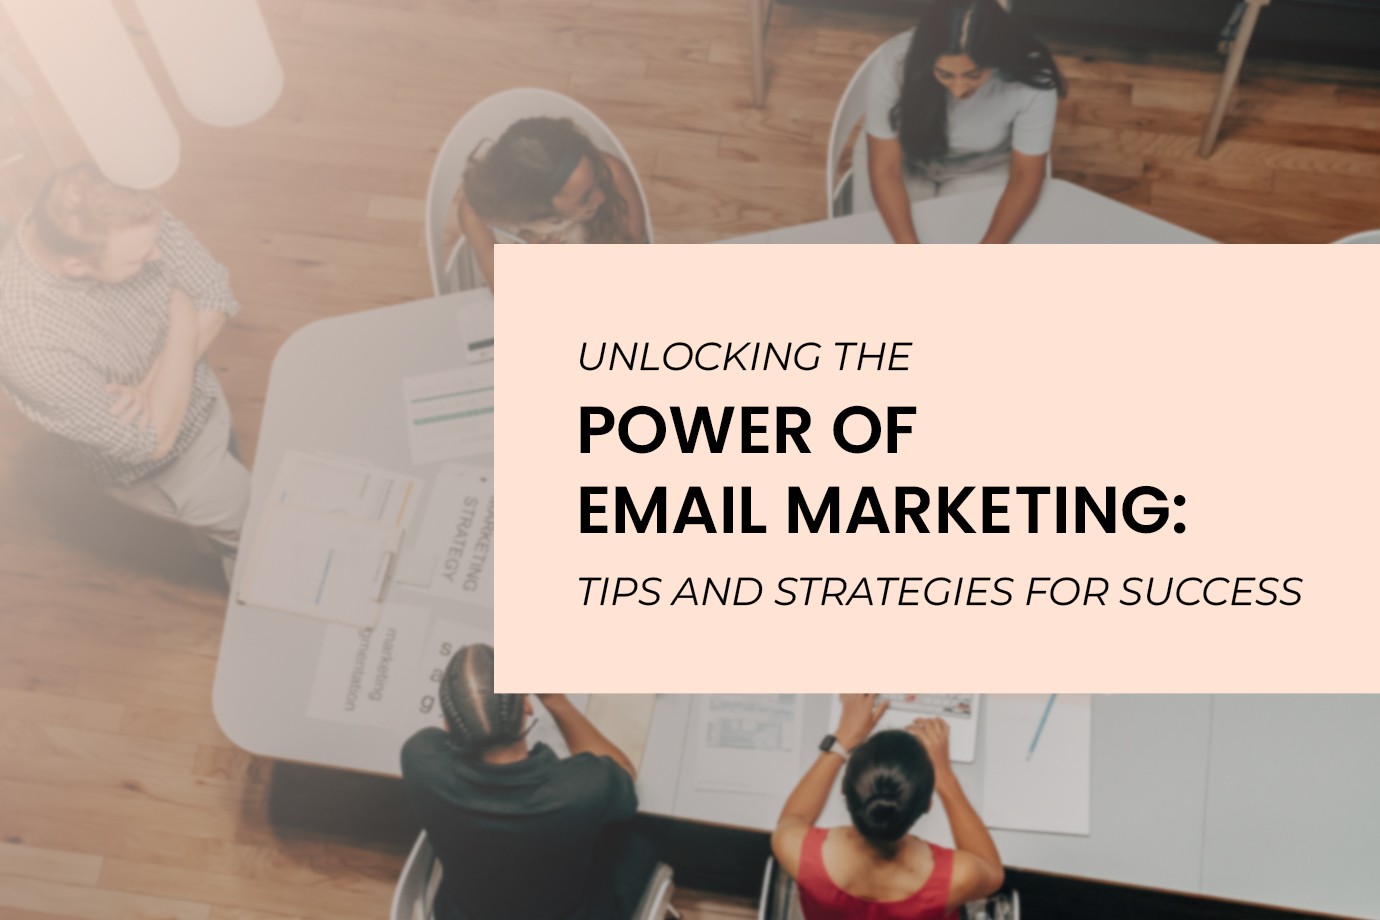 Unlocking the Power of Email Marketing: Tips and Strategies for Success